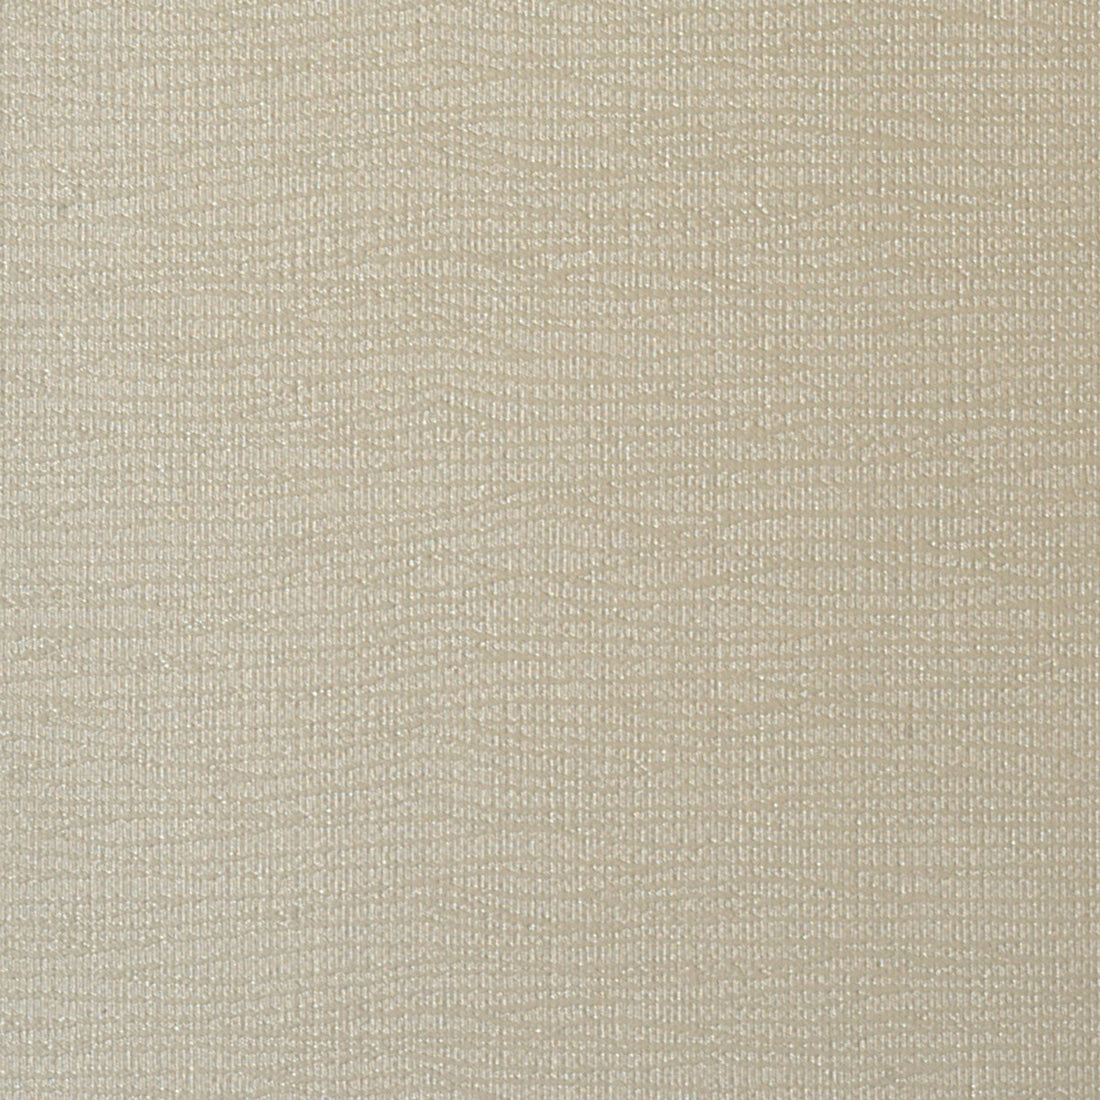 Seismic fabric in shale color - pattern SEISMIC.16.0 - by Kravet Contract in the Contract Sta-Kleen collection